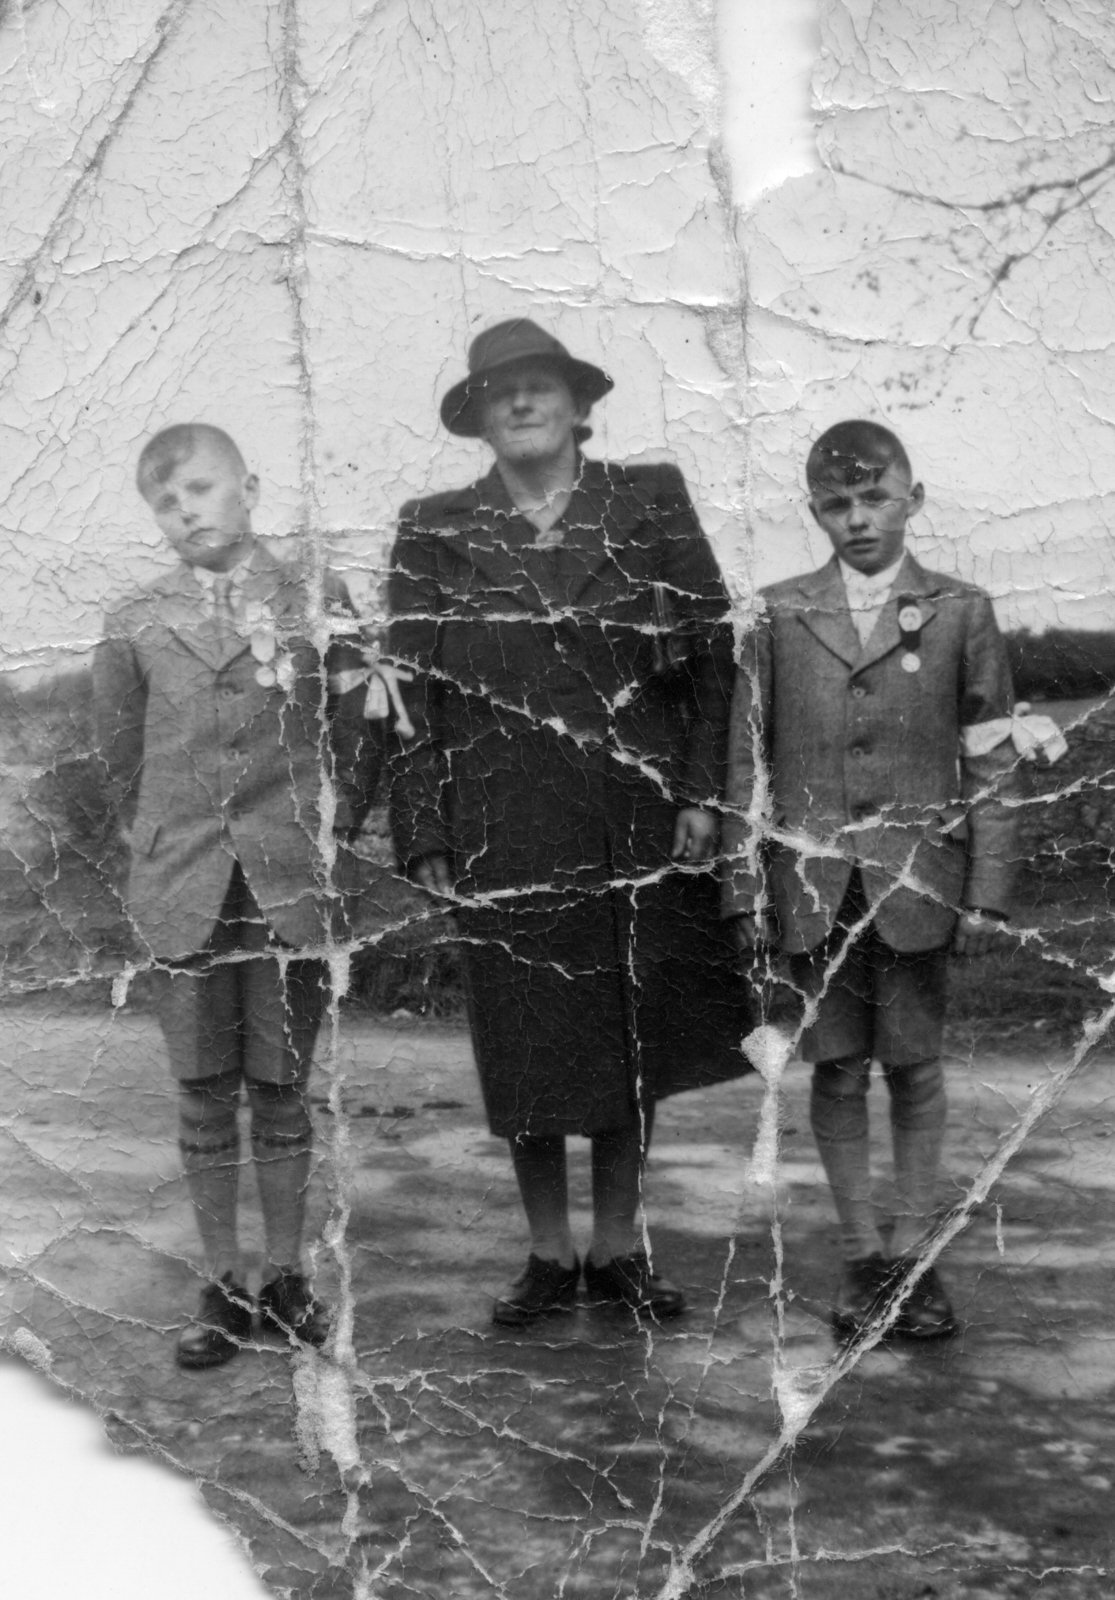 Mother Margaret Scully (neé Egan from Clare) with her sons John (L) and Matt (R) who were making their First Holy Communion.